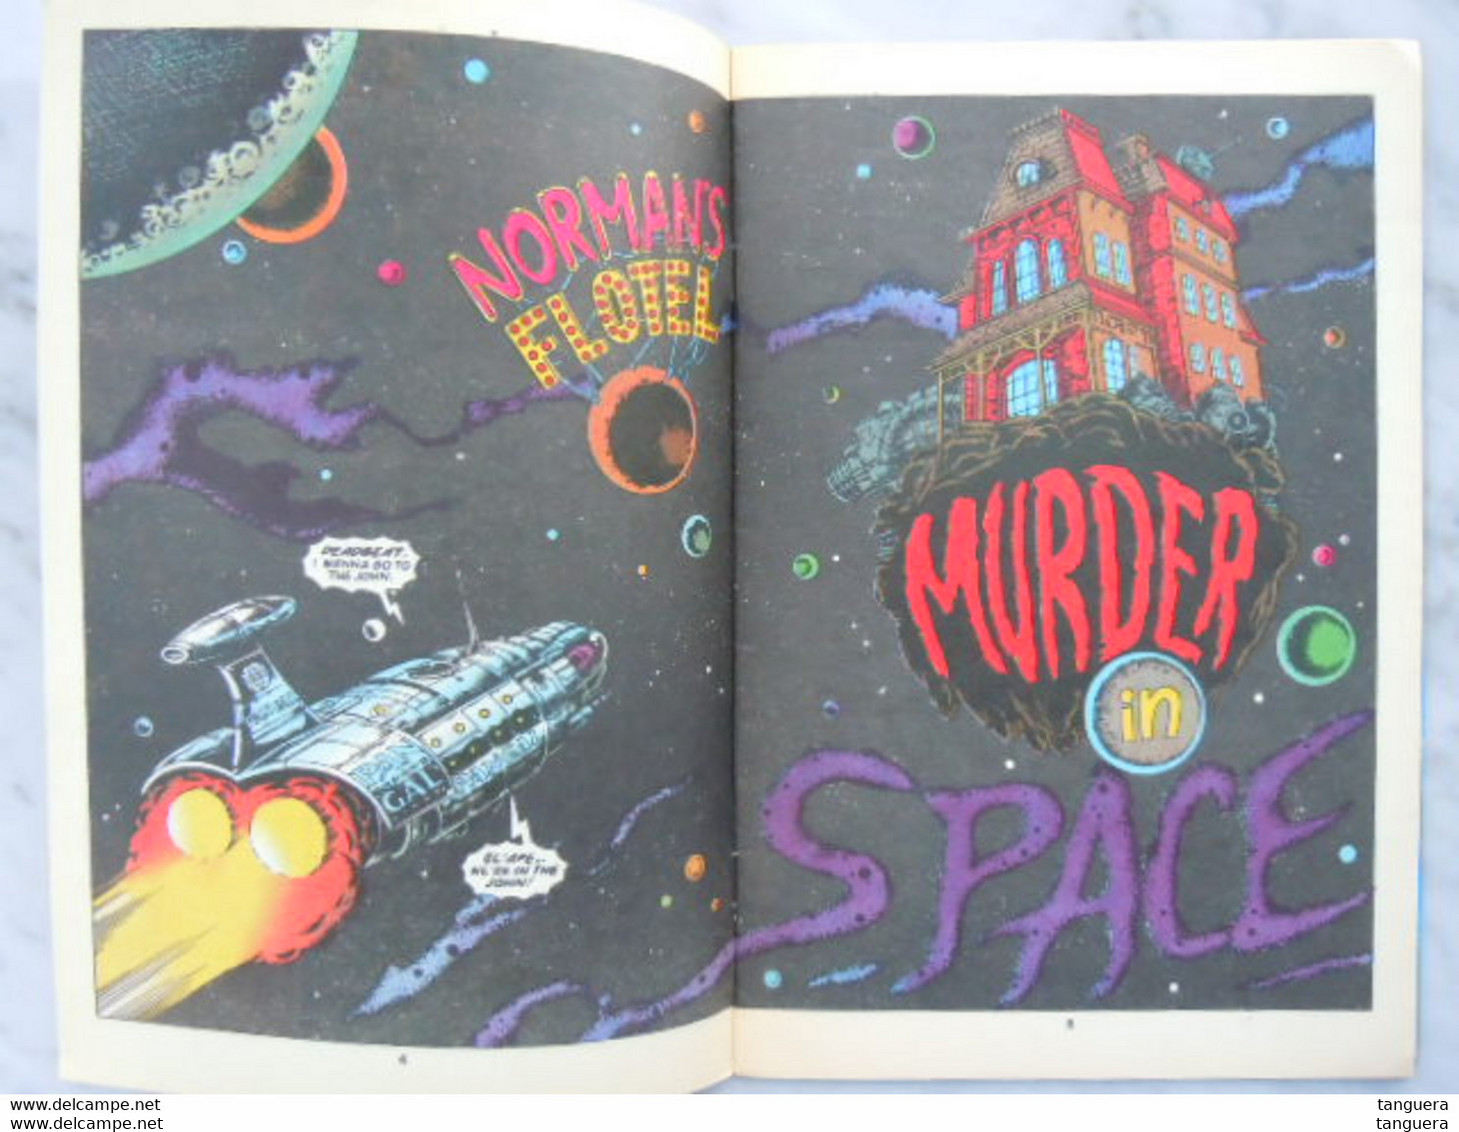 Sleeze Brothers 4 1989 Murder In Space 26 Pages Epic Comics - Other Publishers